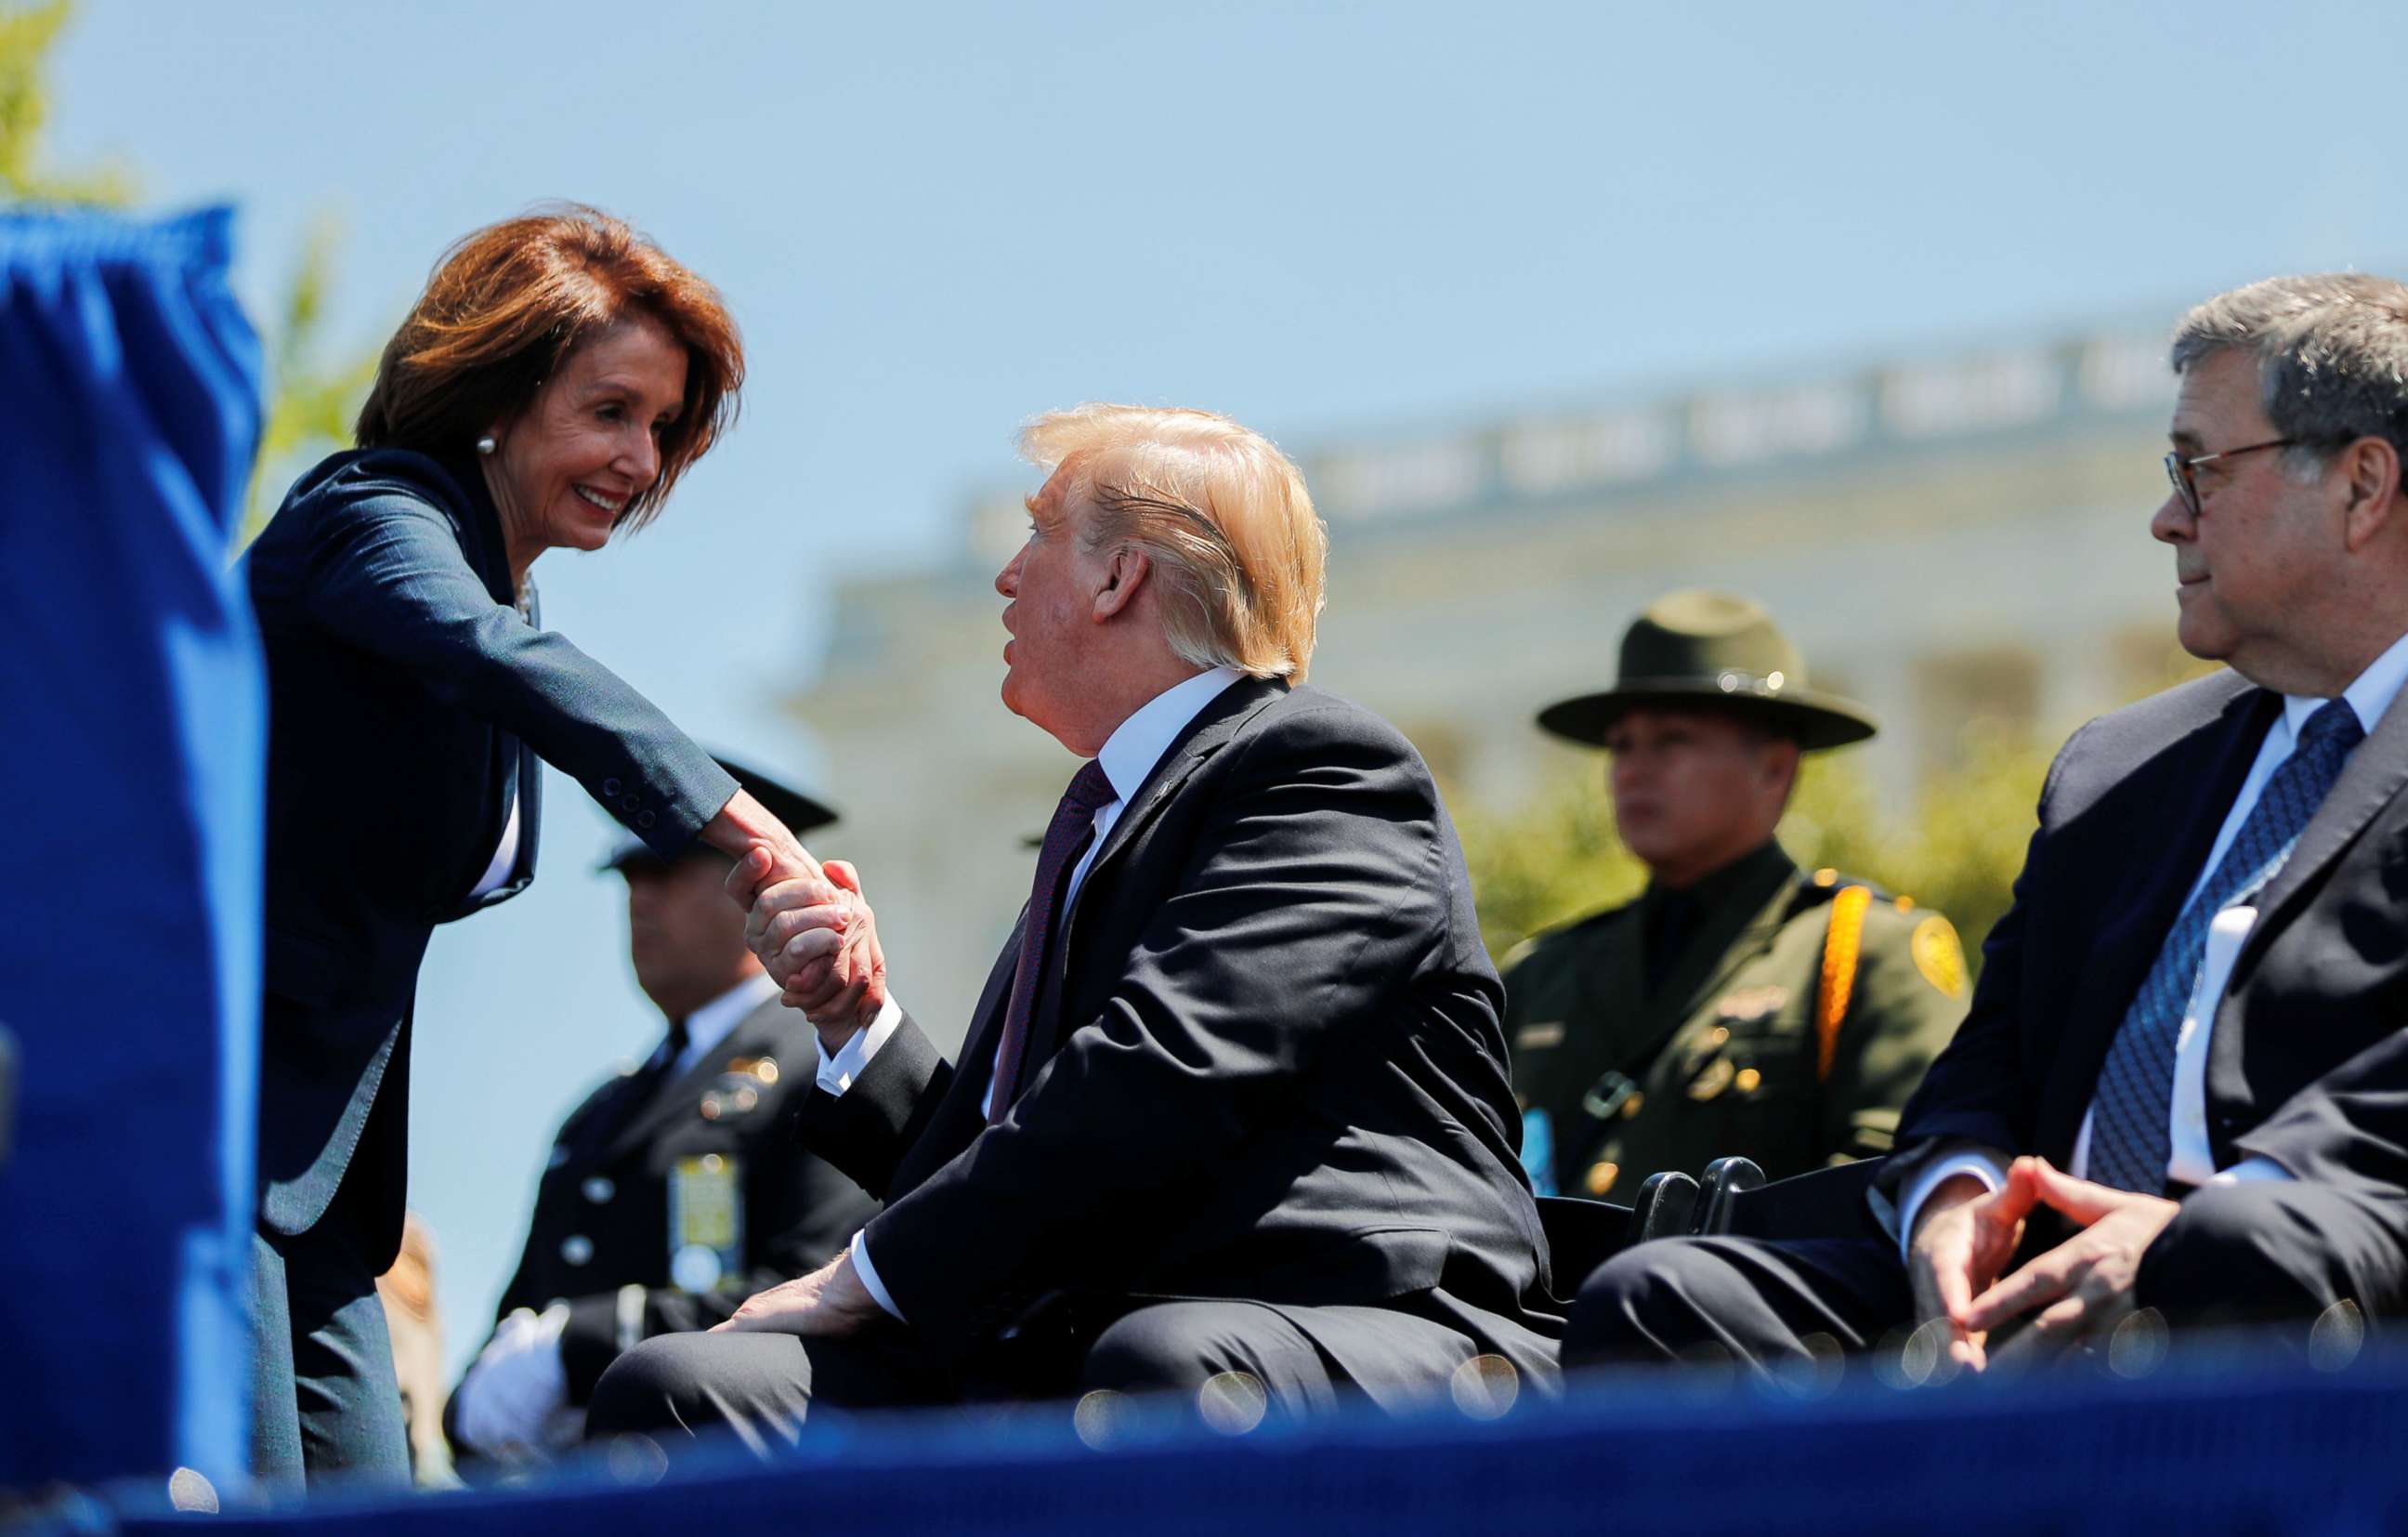 PHOTO: President Donald Trump shakes hands with Speaker of the House Nancy Pelosi while Attorney General William Barr looks on as they all attend the 38th Annual National Peace Officers Memorial Service on Capitol Hill, May 15, 2019. 